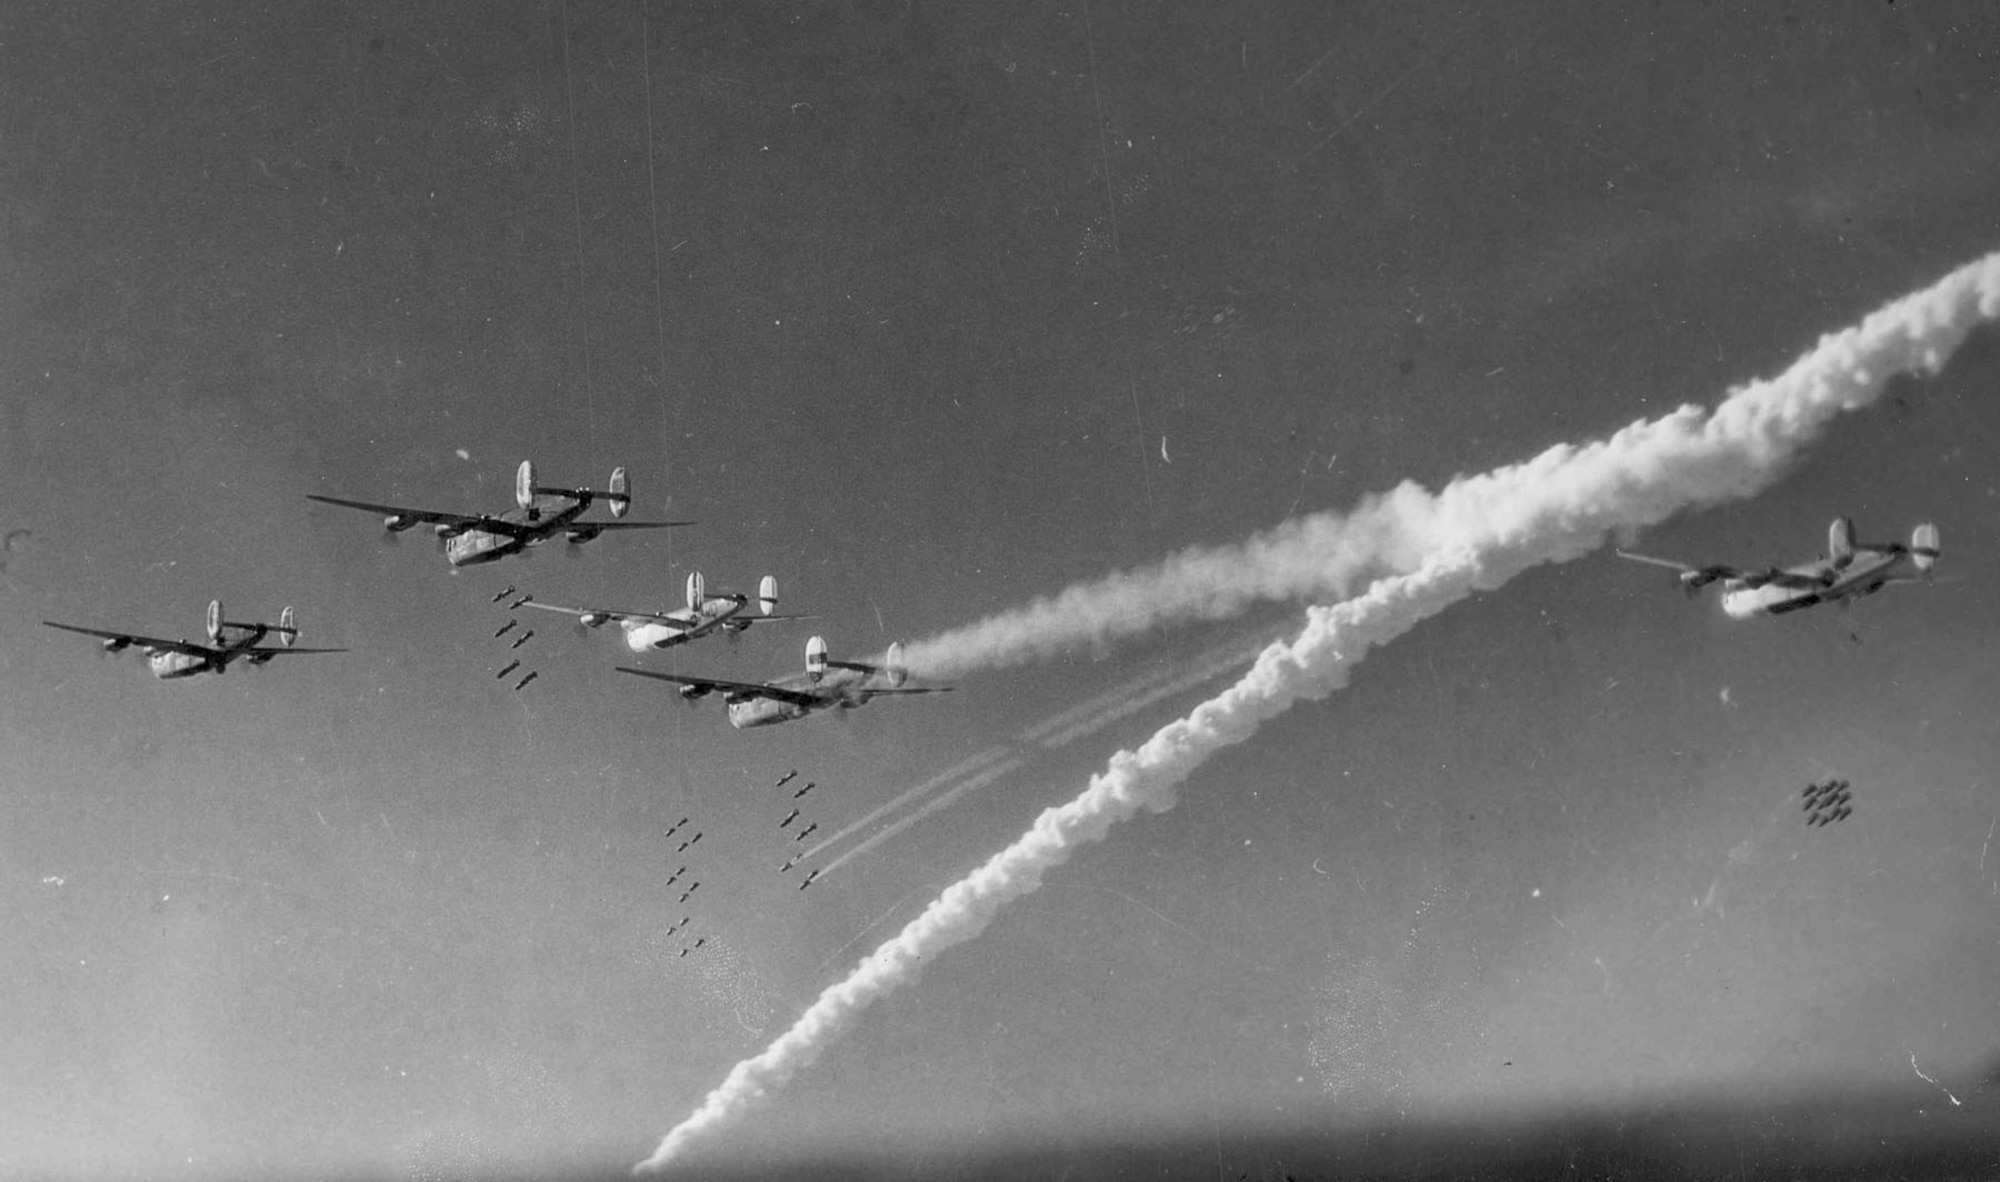 Consolidated B-24s on a bombing run. (U.S. Air Force photo)